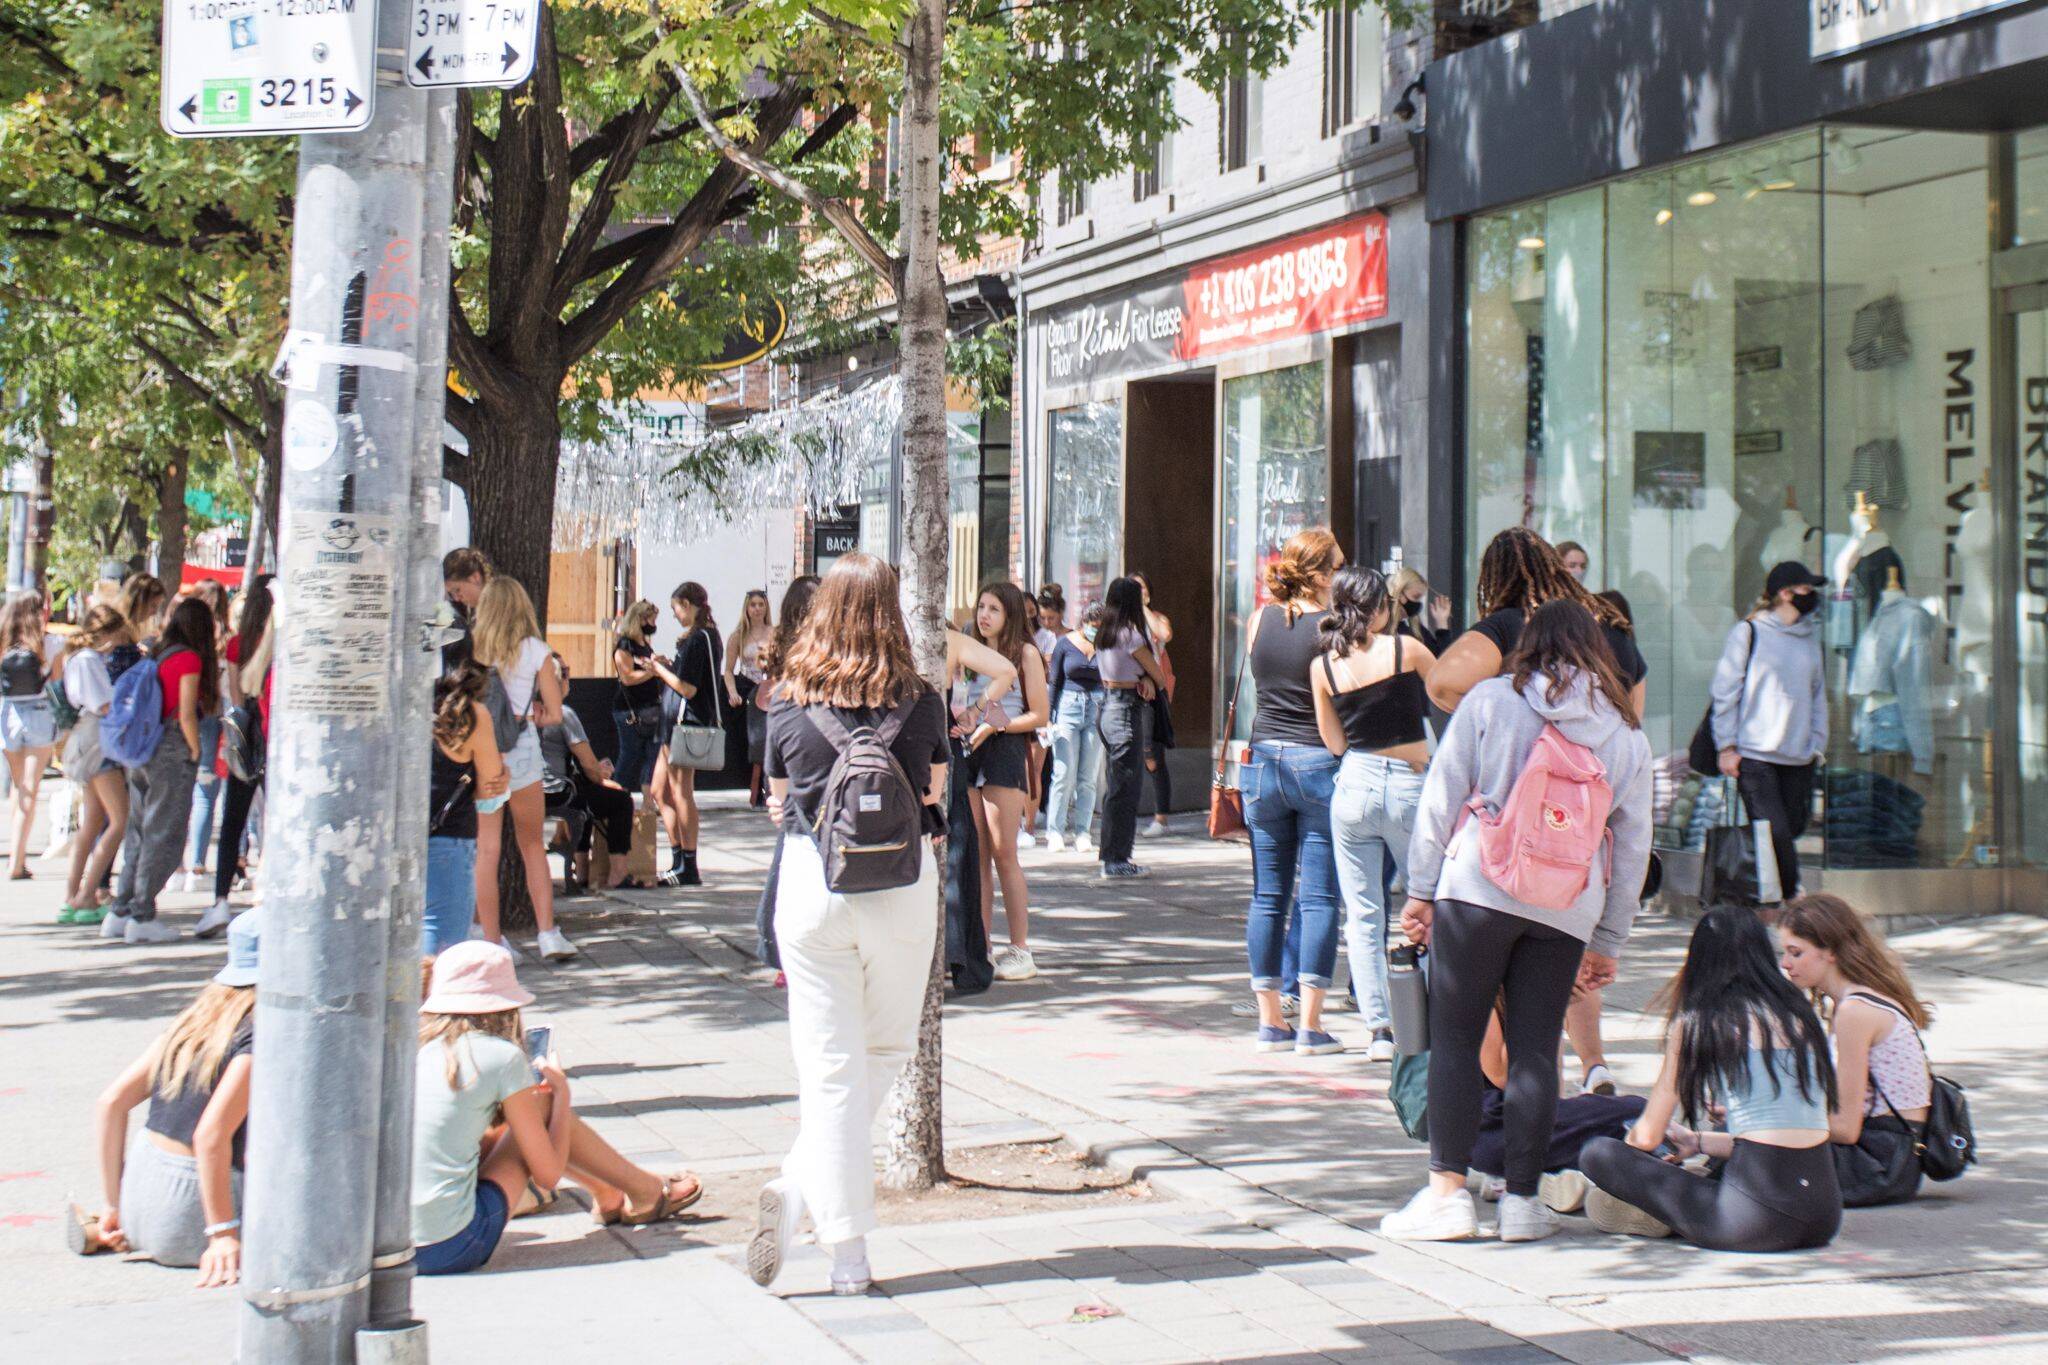 Teens Love Brandy Melville, A Fashion Brand That Sells Only One Tiny Size